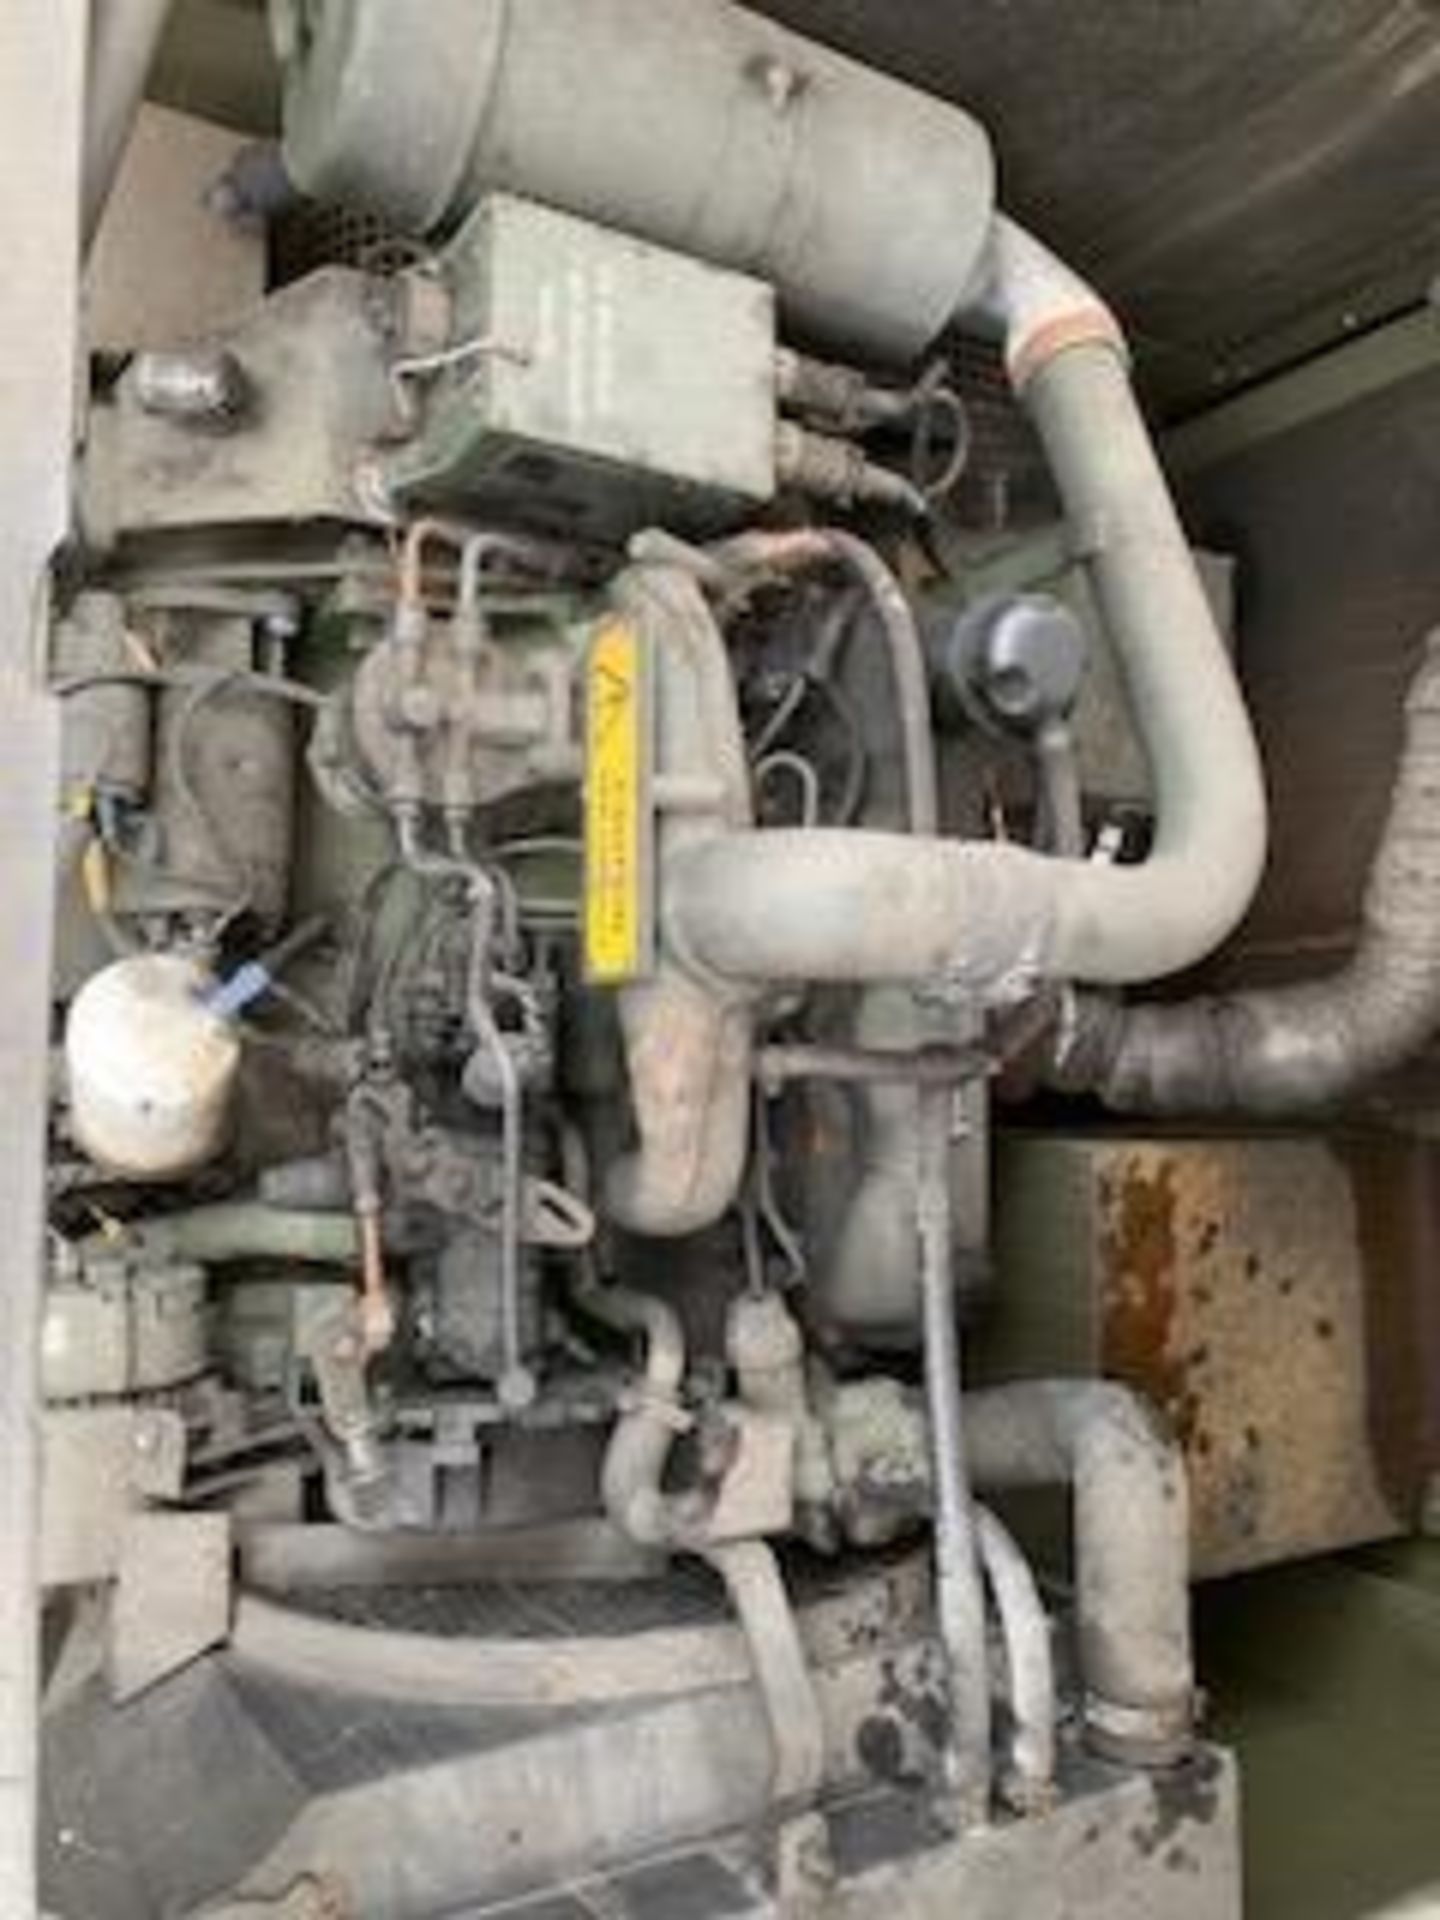 HUNTING 25KVA SILENCED GENERATOR - 4CY FORD DIESEL ENGINE - Image 3 of 7